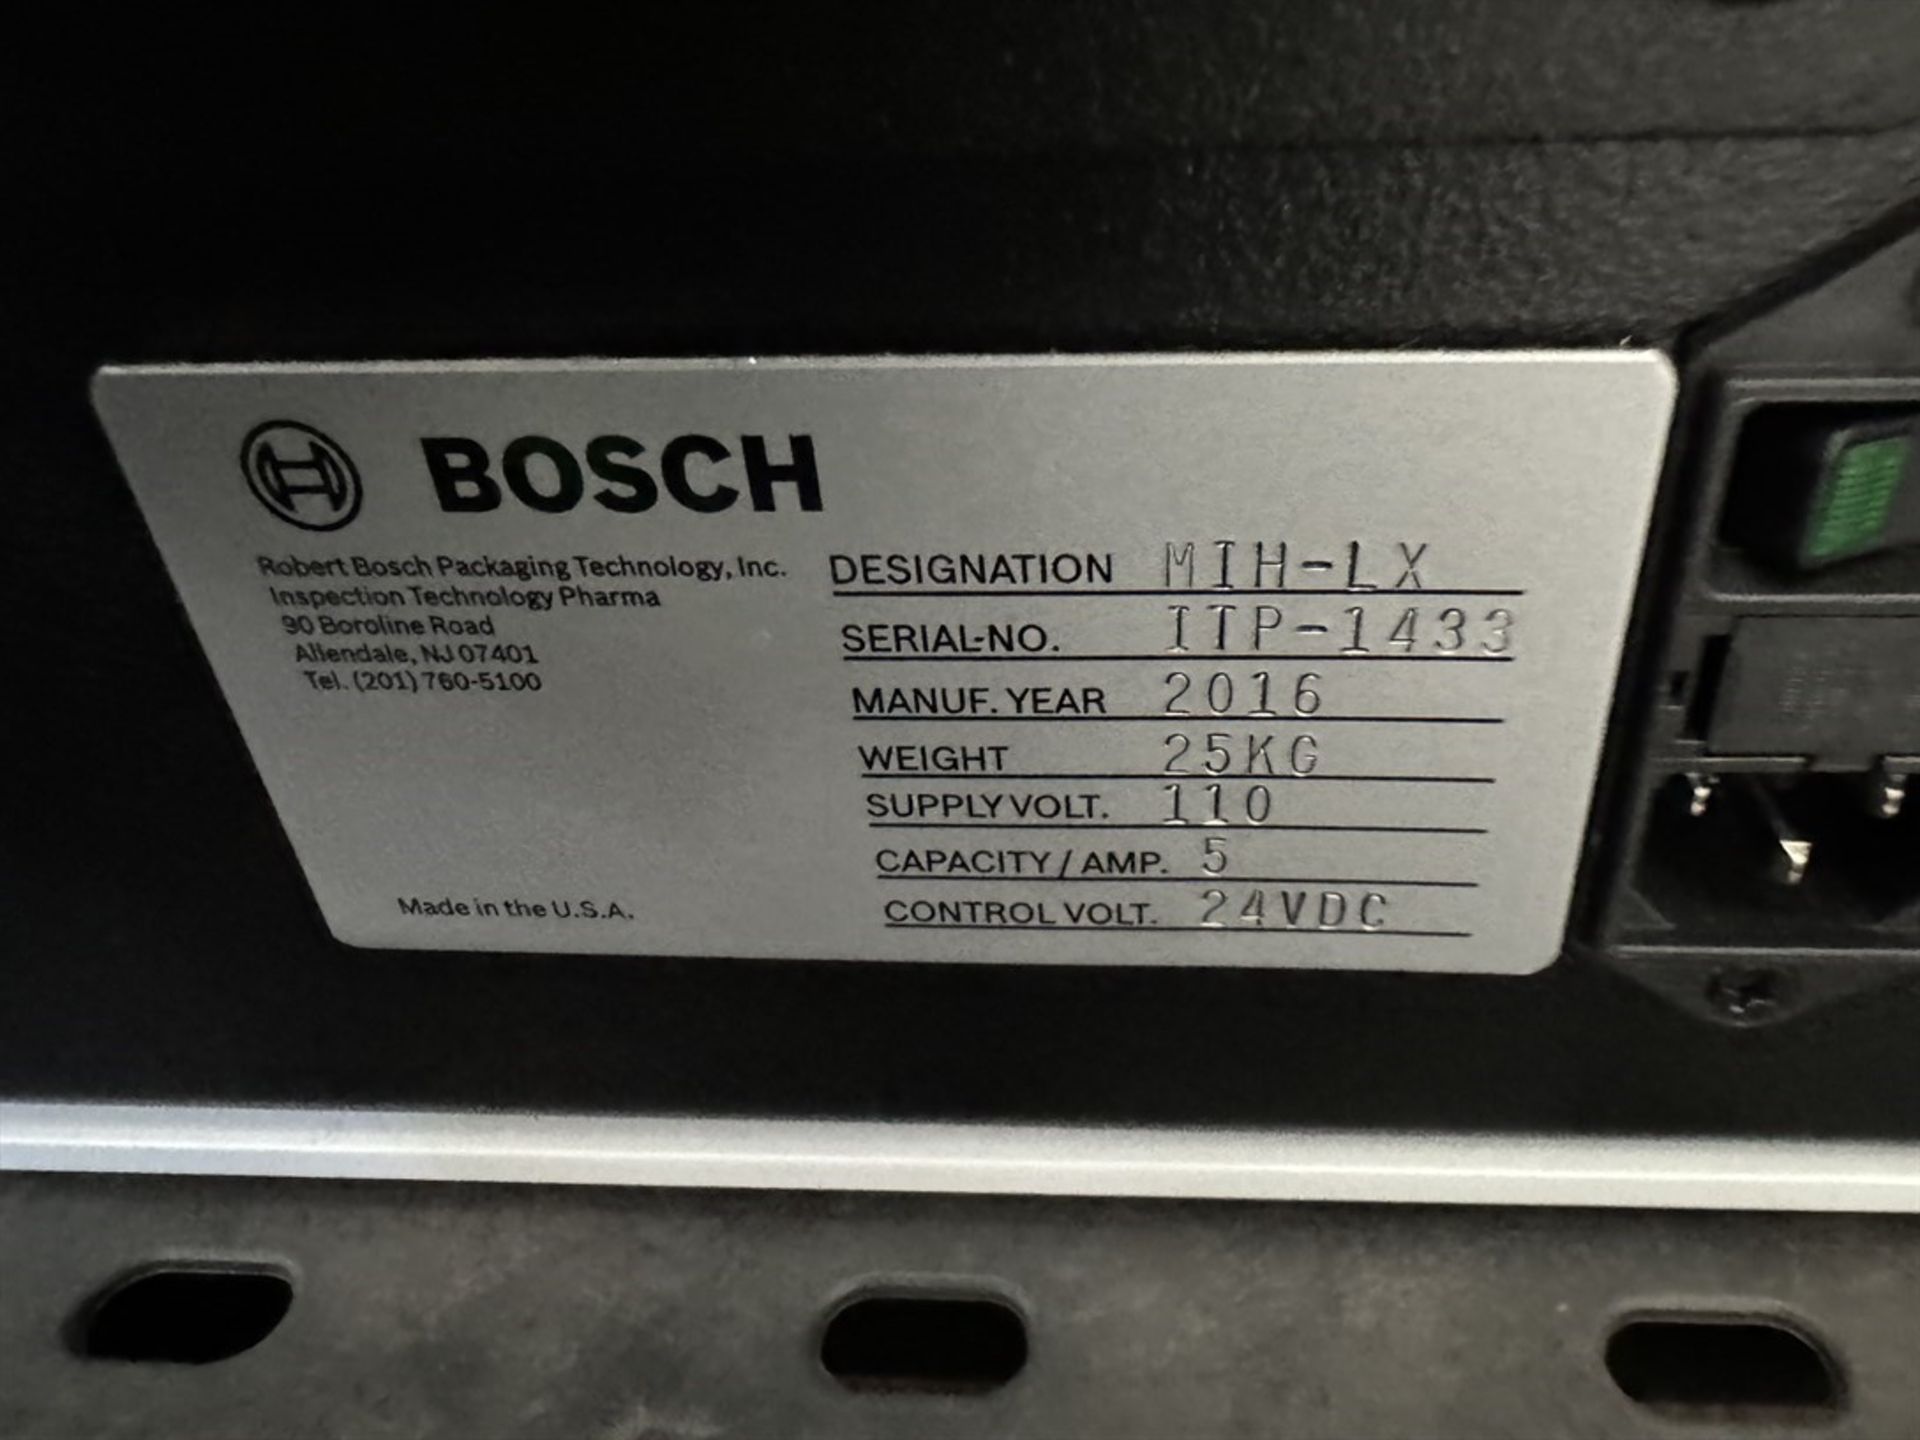 2016 BOSCH MIH-LX Manual Inspection Hood, s/n ITP-1433 - Image 3 of 3